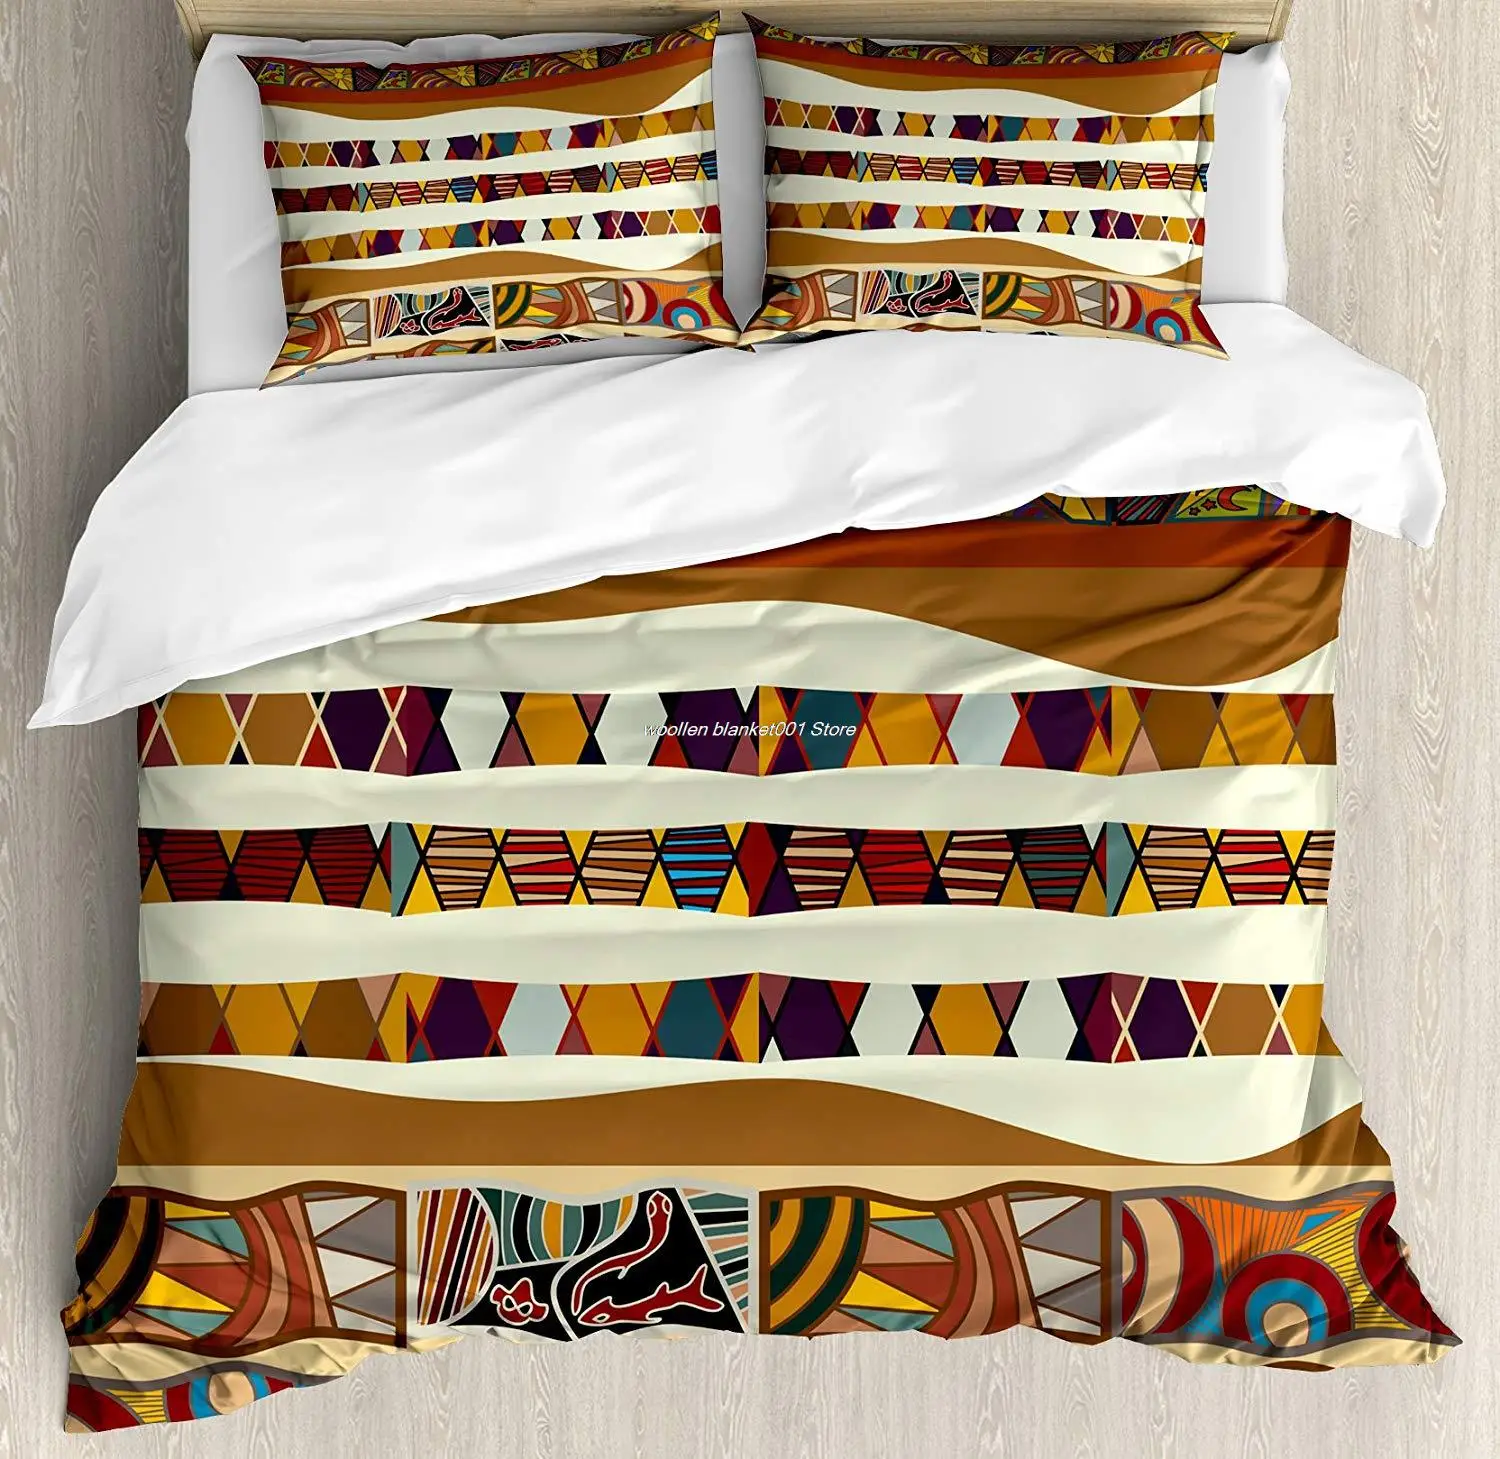 

Tribal Duvet Cover Set Traditional Folk with Cultural Featured Trippy Boho Abstract Design Decorative 3 Piece Bedding Set